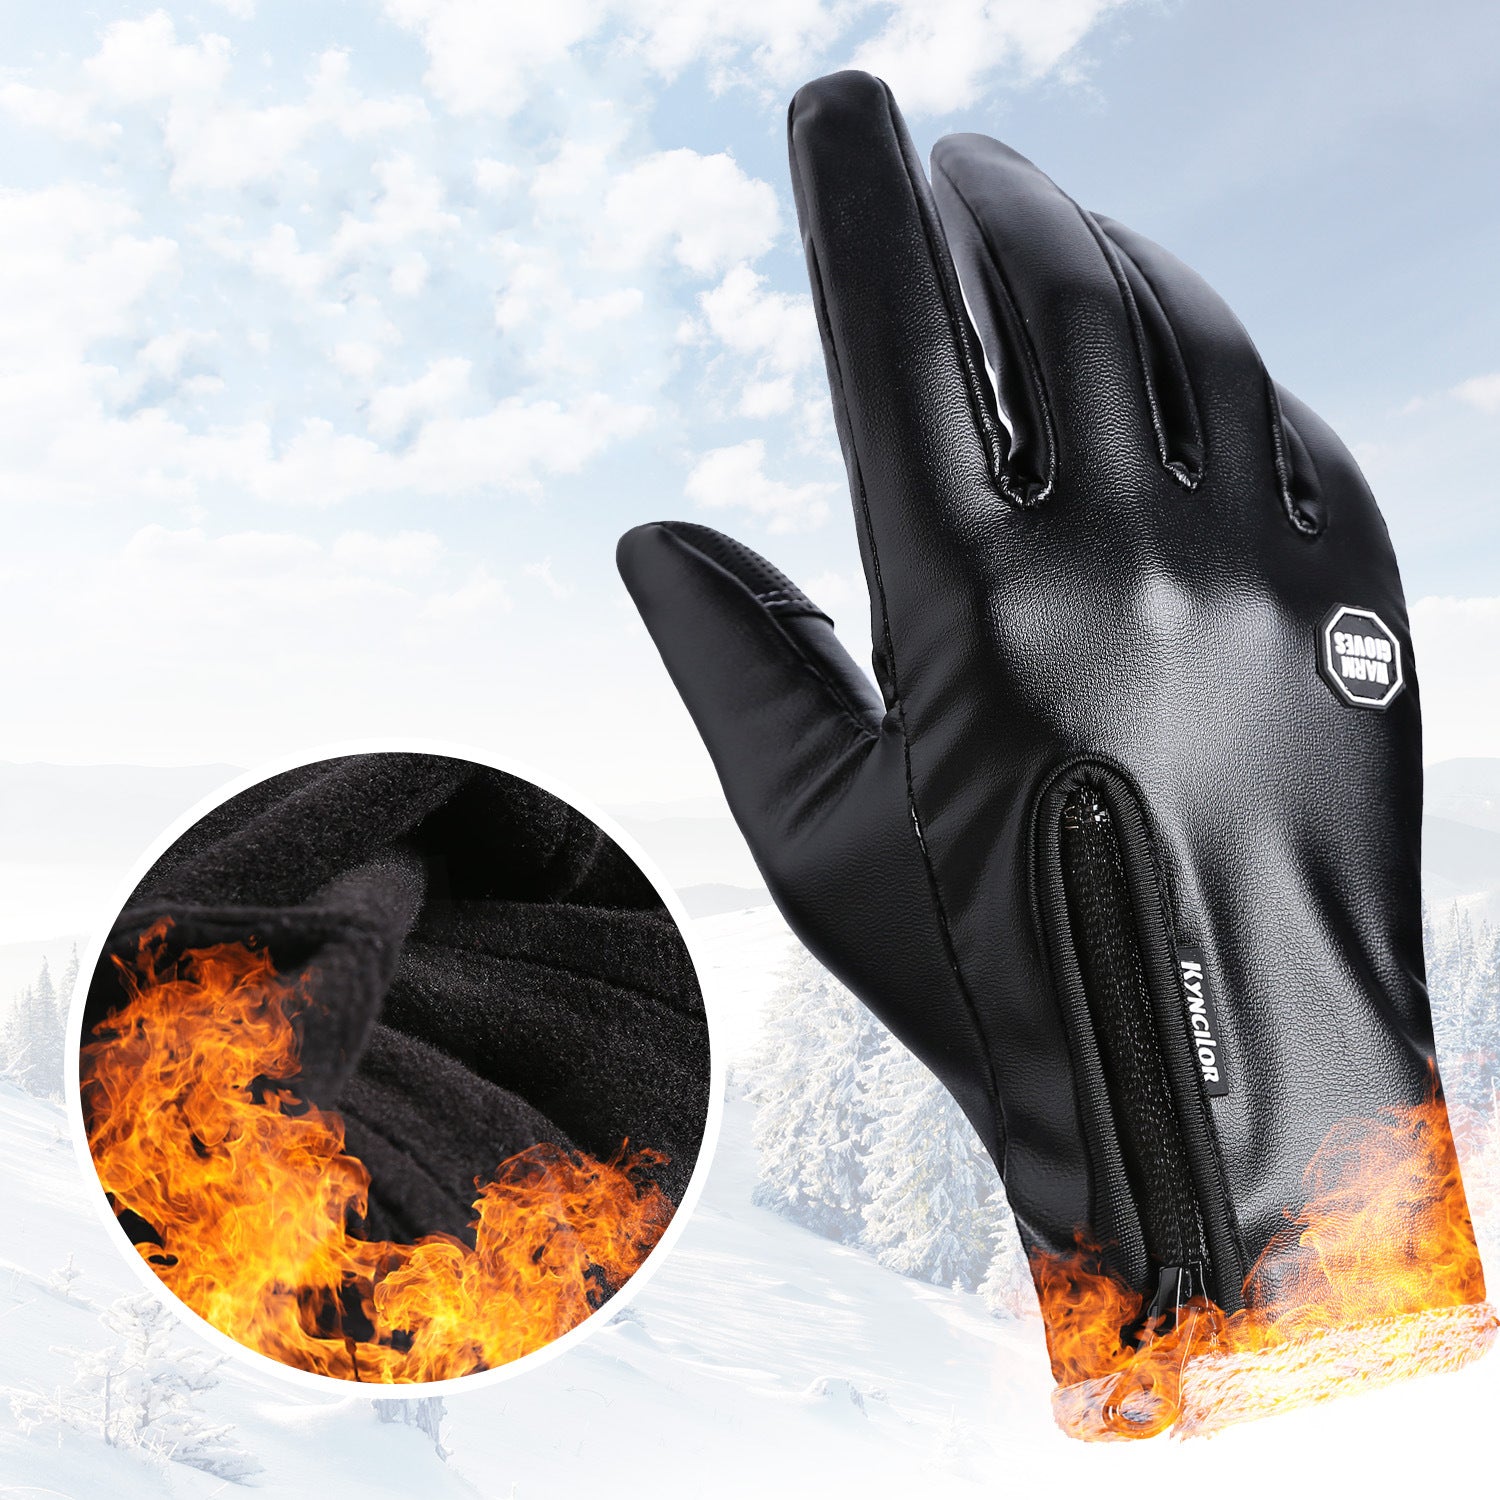 Black Waterproof Touch Screen Gloves Windproof PU Leather Winter Warm Fashion Unisex Fleece For Outdoor Sports Riding Bicycle Motorcycle Skiing Hiking